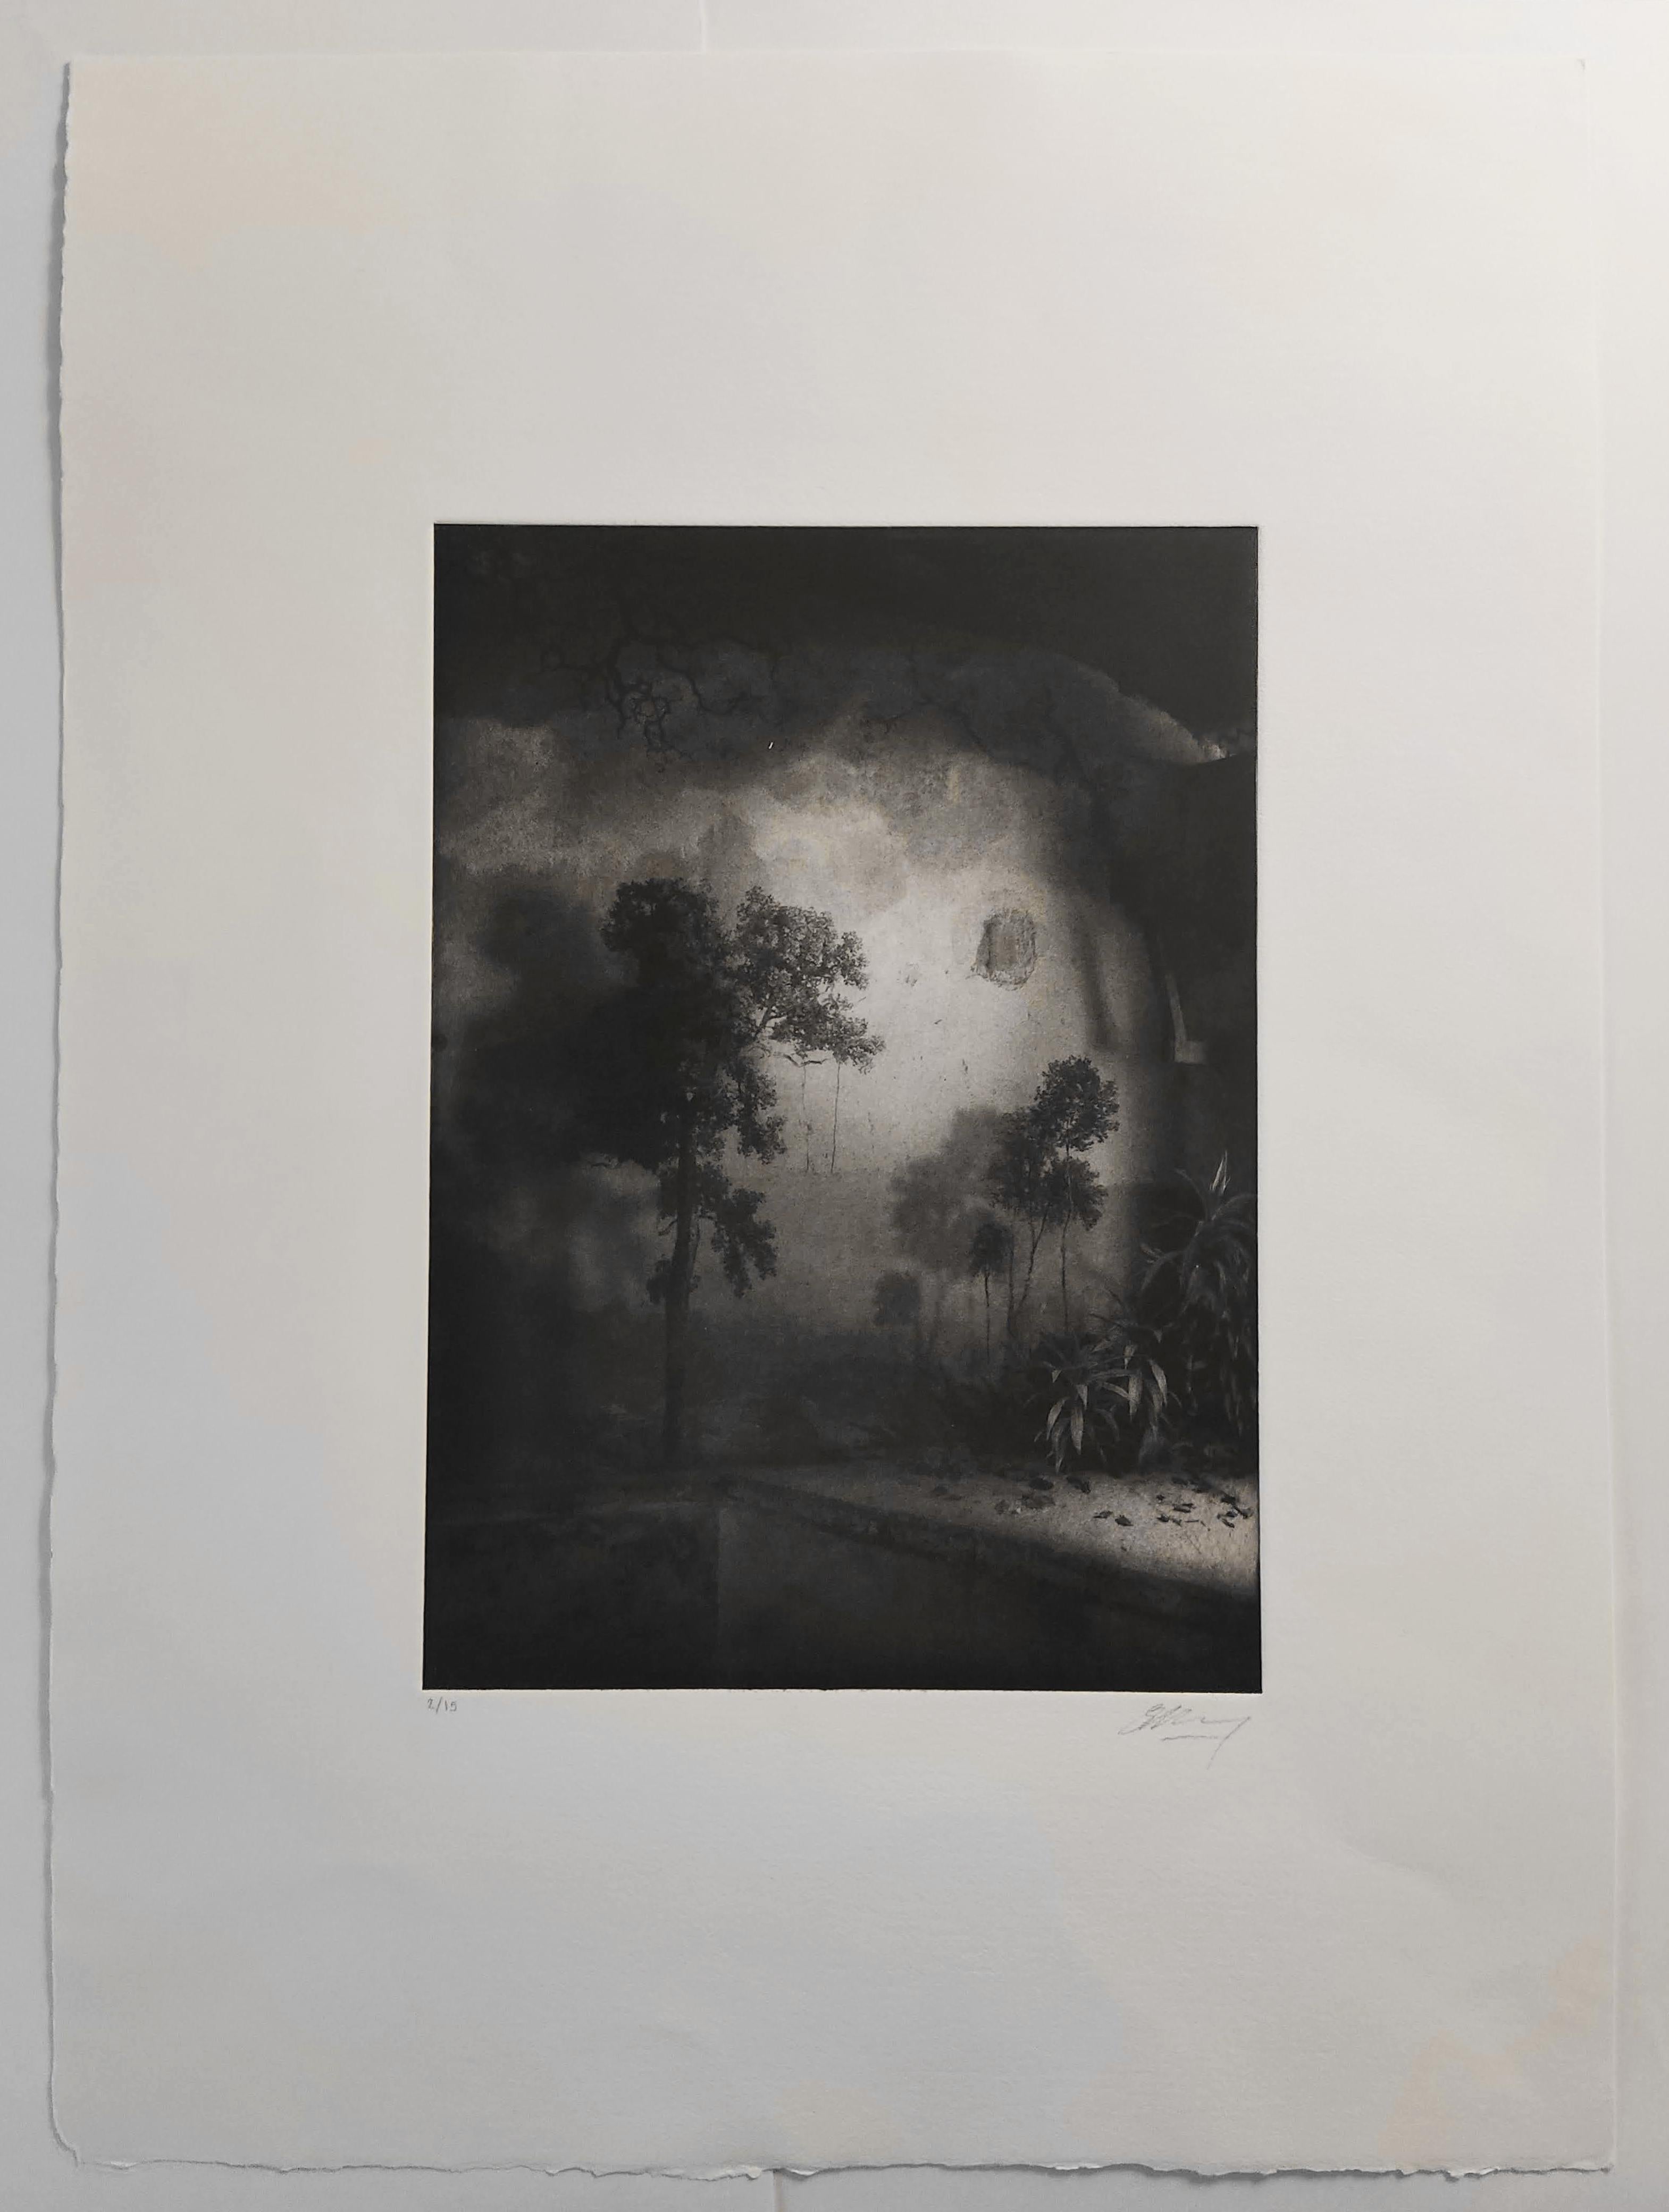 Work :  Original Photogravure / Etching, Handmade Artwork, Limited Edition of 15. The work is not framed.
Medium : Photopolymer Gravure on Fine Art paper 300Gsm
Artist : Suzanne Moxhay
Subject / Title : Room with Trees and Vegetation
Signature : The